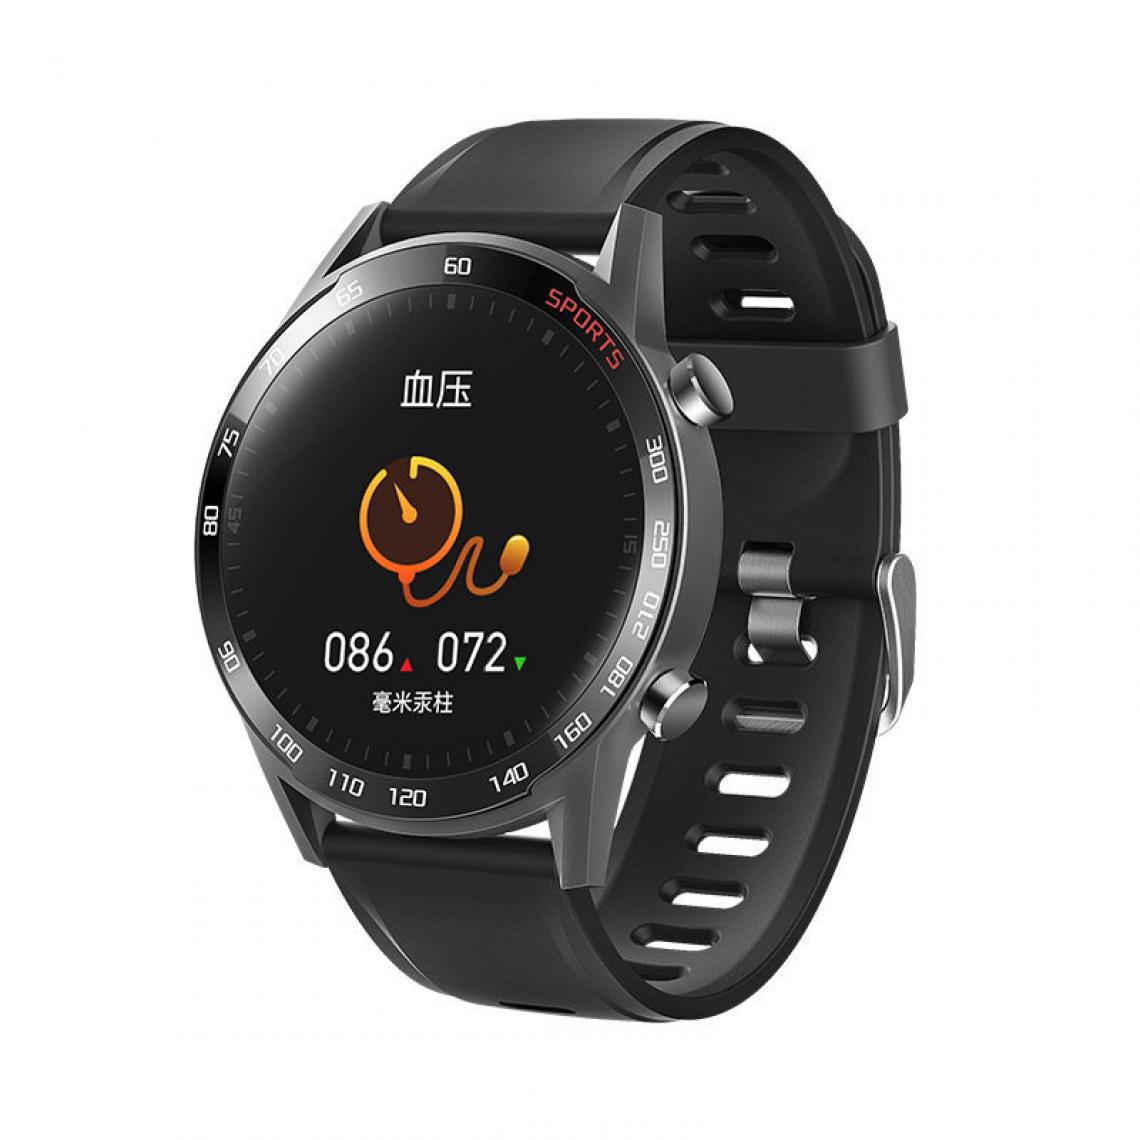 Chronotech Montres - Chronus Smart Watch withActivity Trackers with Heart Rate/Sleep/Blood Oxygen Monitor 1.4 inch Full Touch (black) - Montre connectée